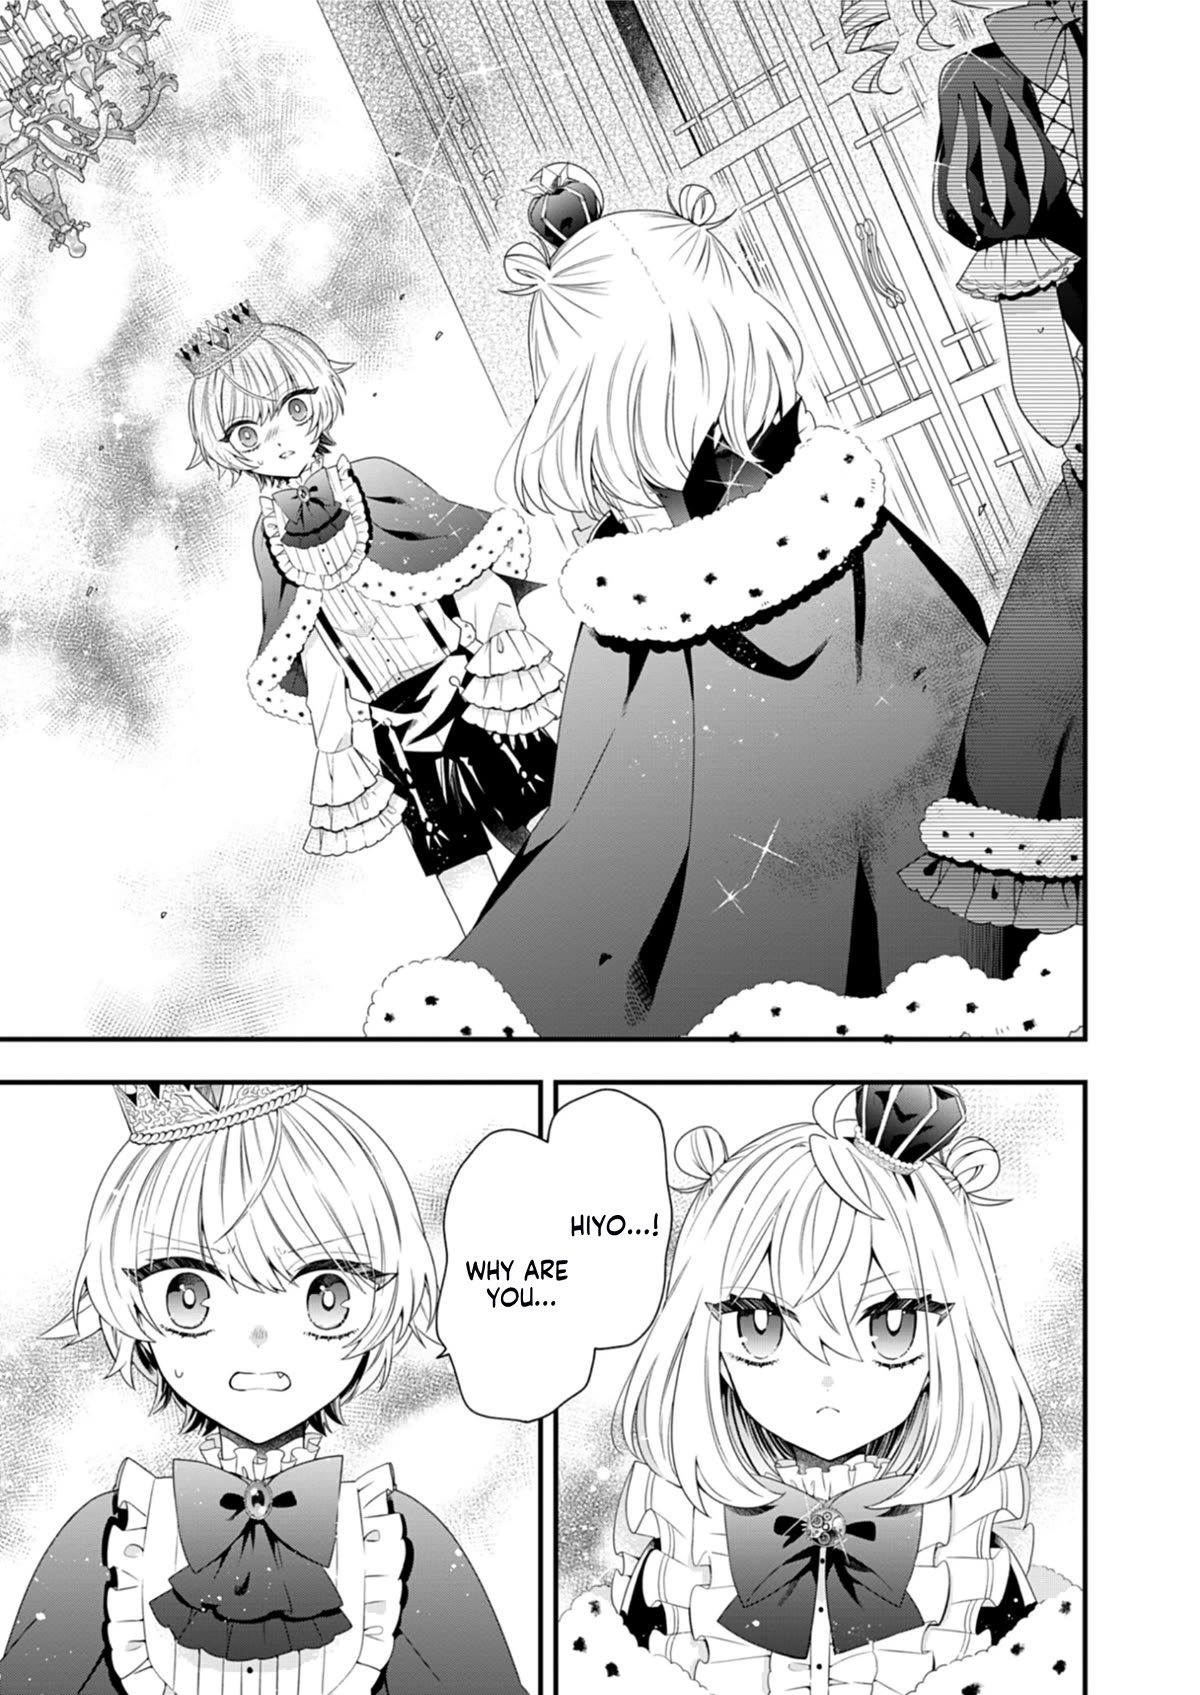 The Old Man That Was Reincarnated as a Young Girl in the Demon World Wants to Become the Demon Lord for the Sake of Peace - chapter 8 - #2